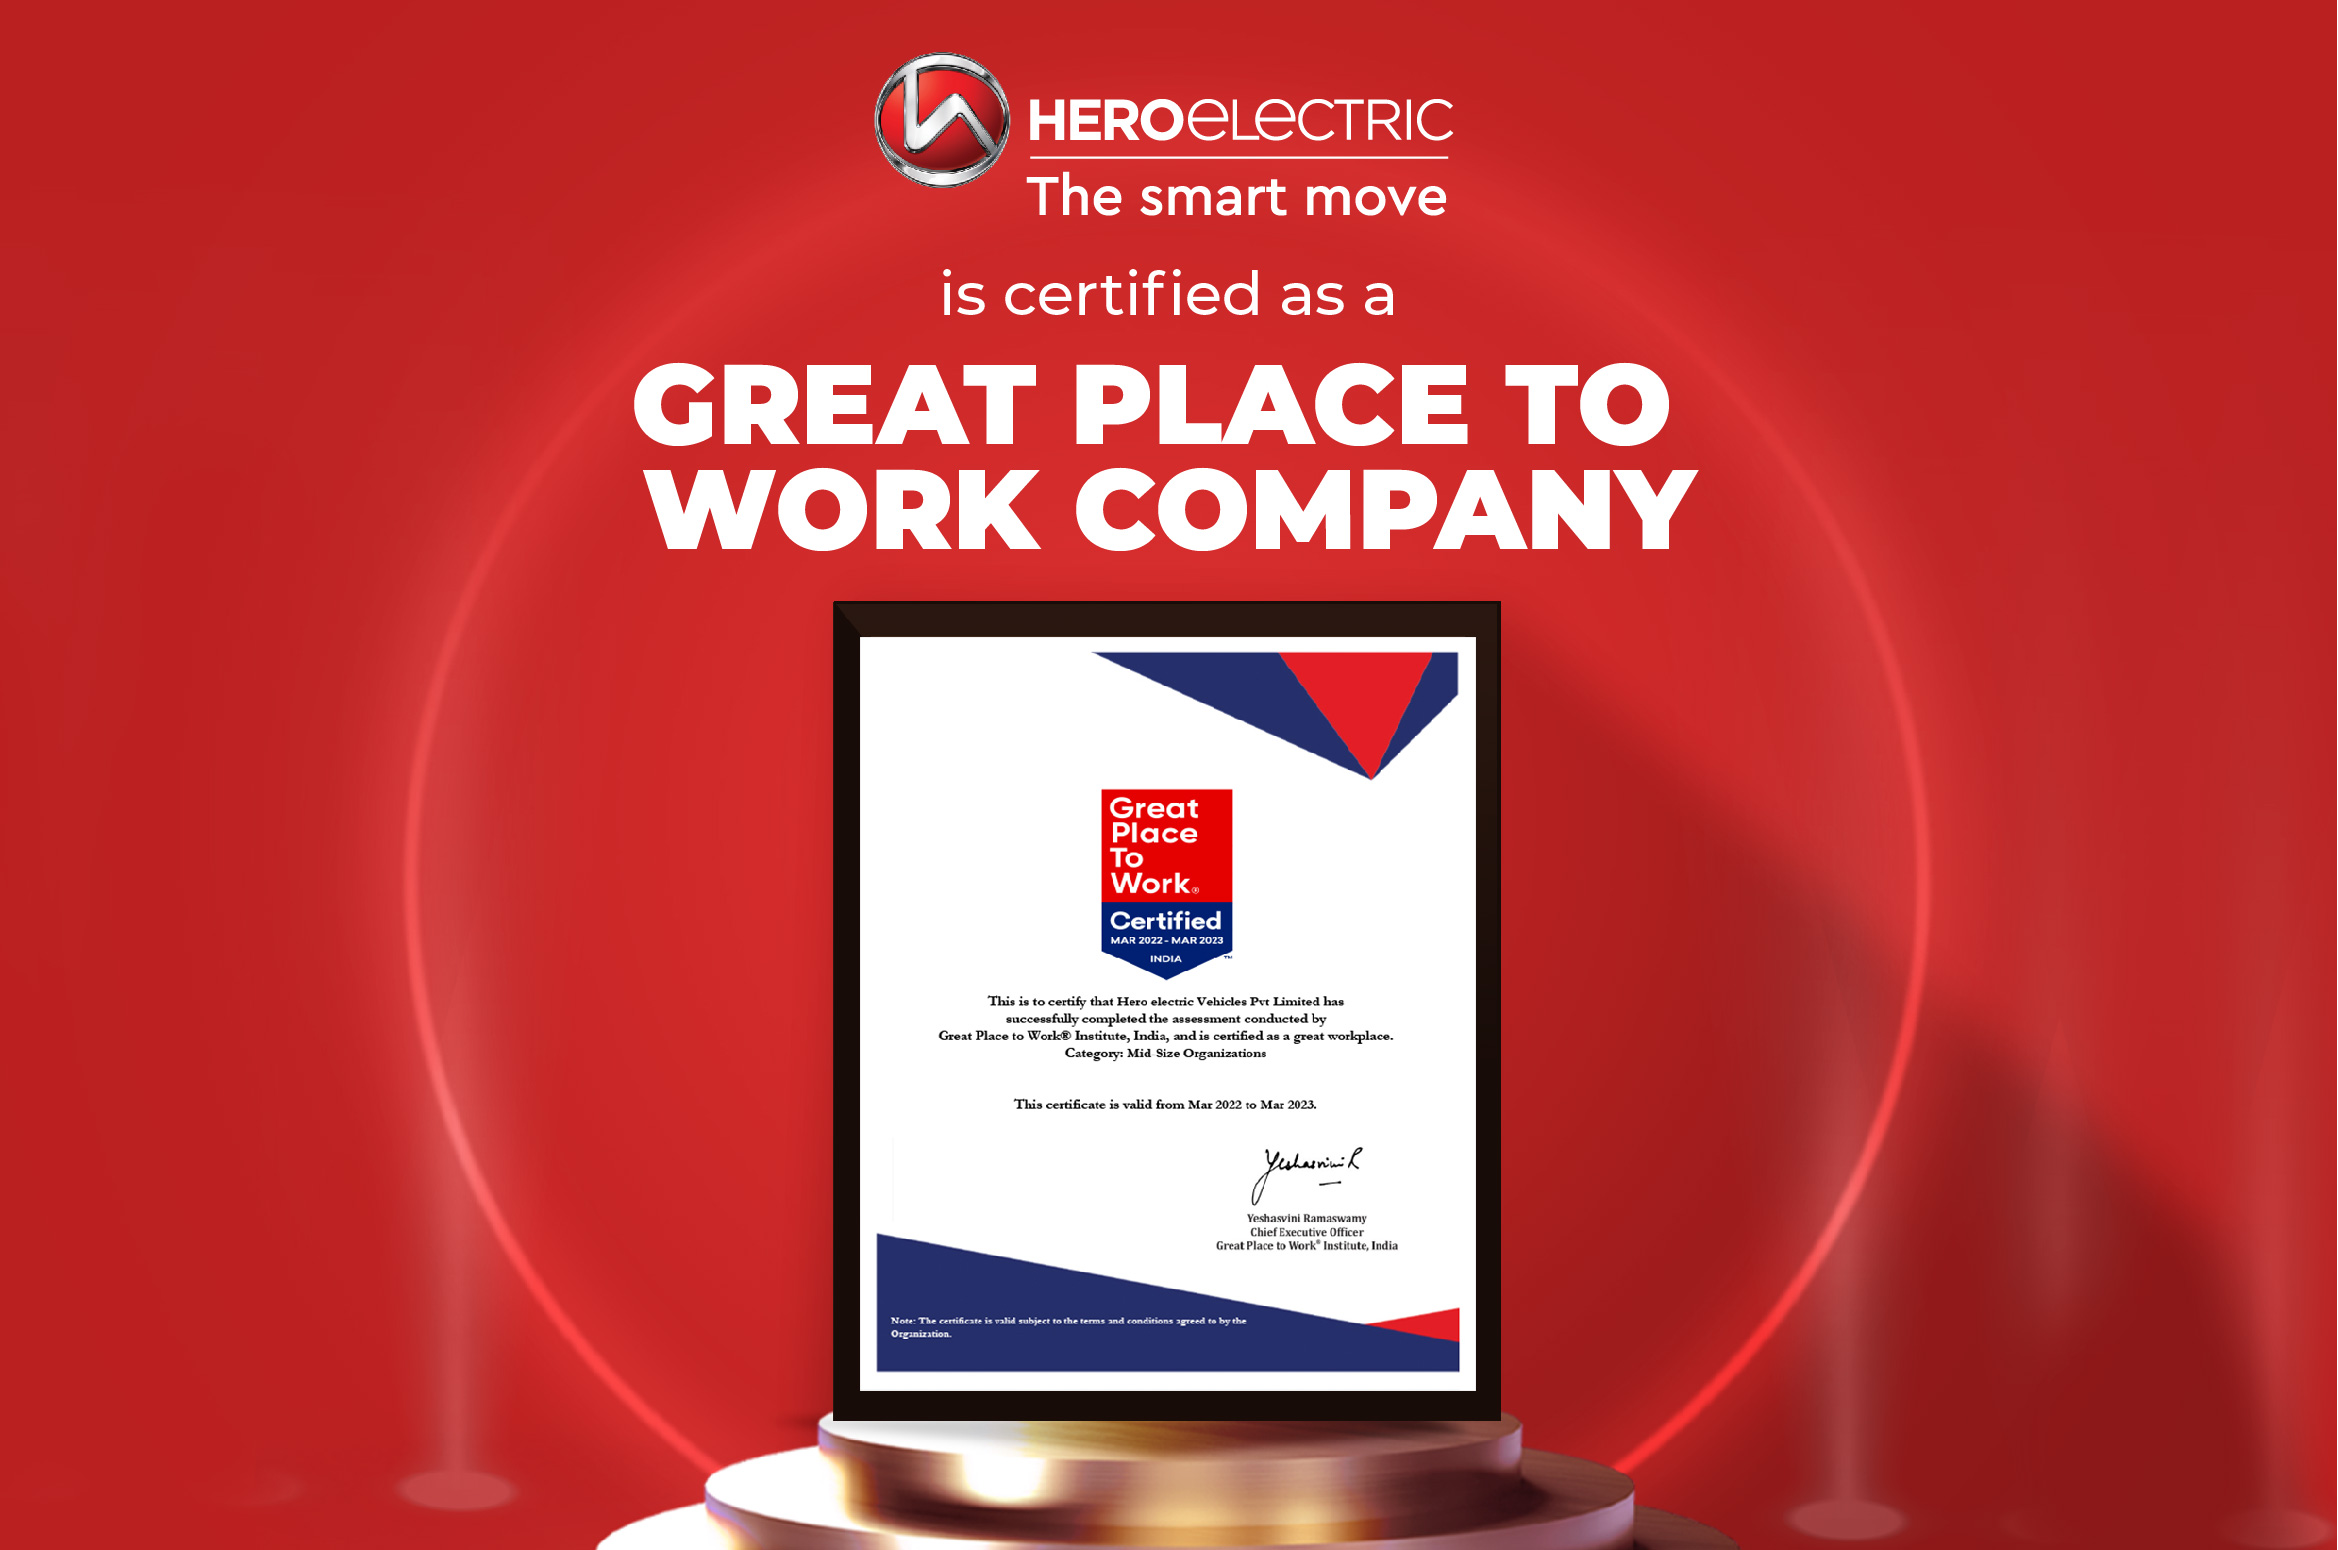 Hero Electric receives Great Place to Work accreditation voted as the Best Place to Work for professionals